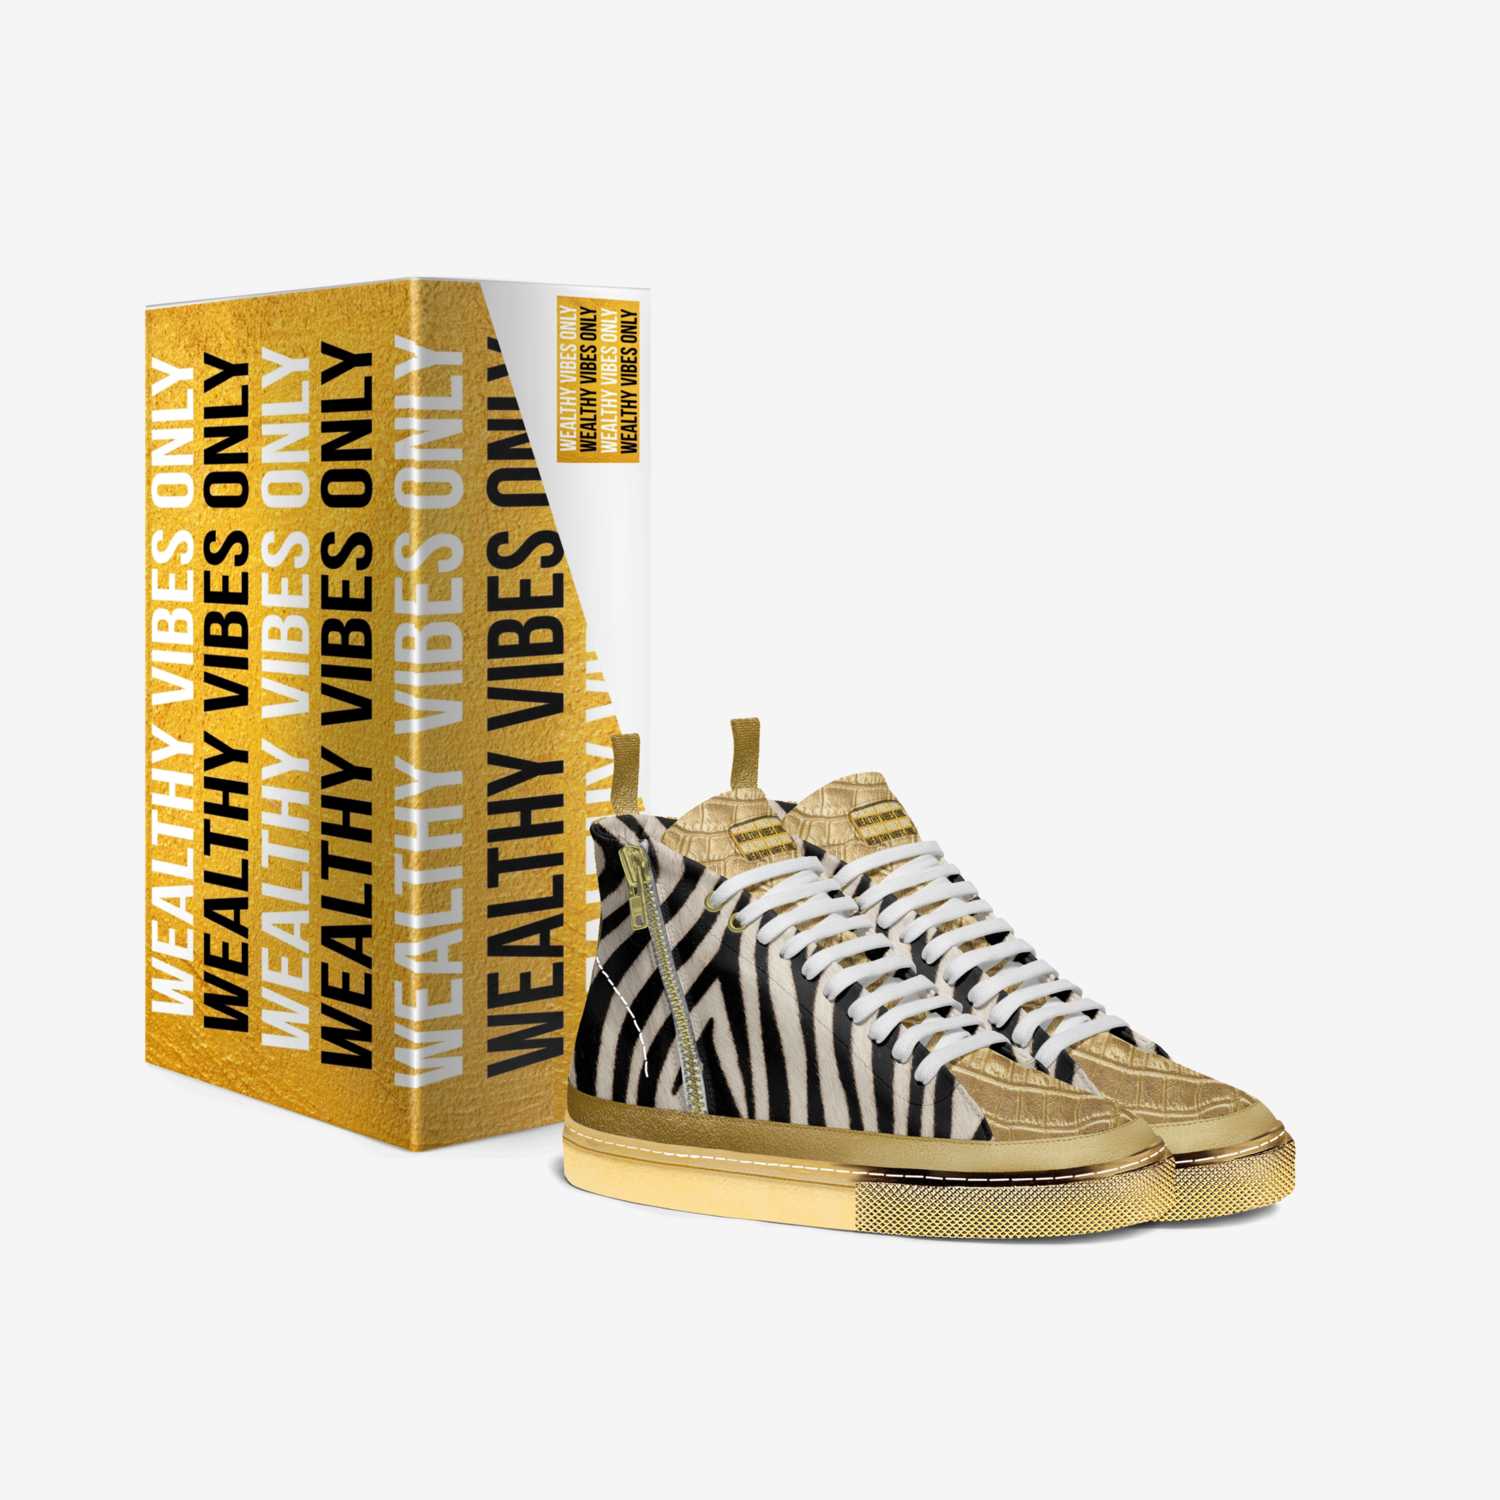 WEALTHY VIBES LUX custom made in Italy shoes by Wealthy Vibes | Box view